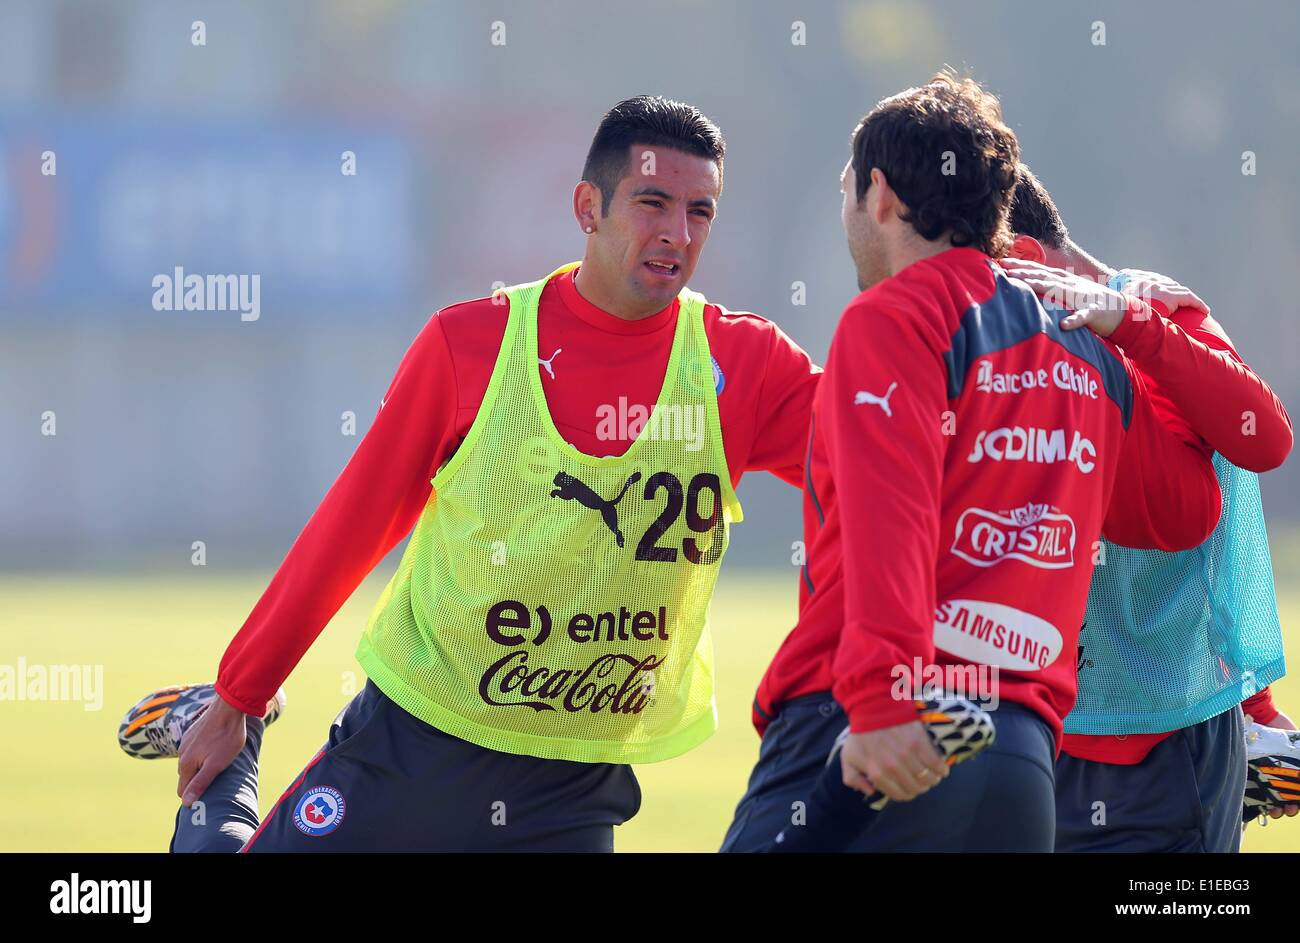 Santiago, Chile. 1st June, 2014. Image provided by National Association of Professional Soccer (ANFP, for its acronym in Spanish) shows Chile's Mauricio Isla (L) participating in a training session ahead FIFA's World Cup 2014 in Santiago, capital of Chile, on June 1, 2014. © Carlos Parra/ANFP/Xinhua/Alamy Live News Stock Photo